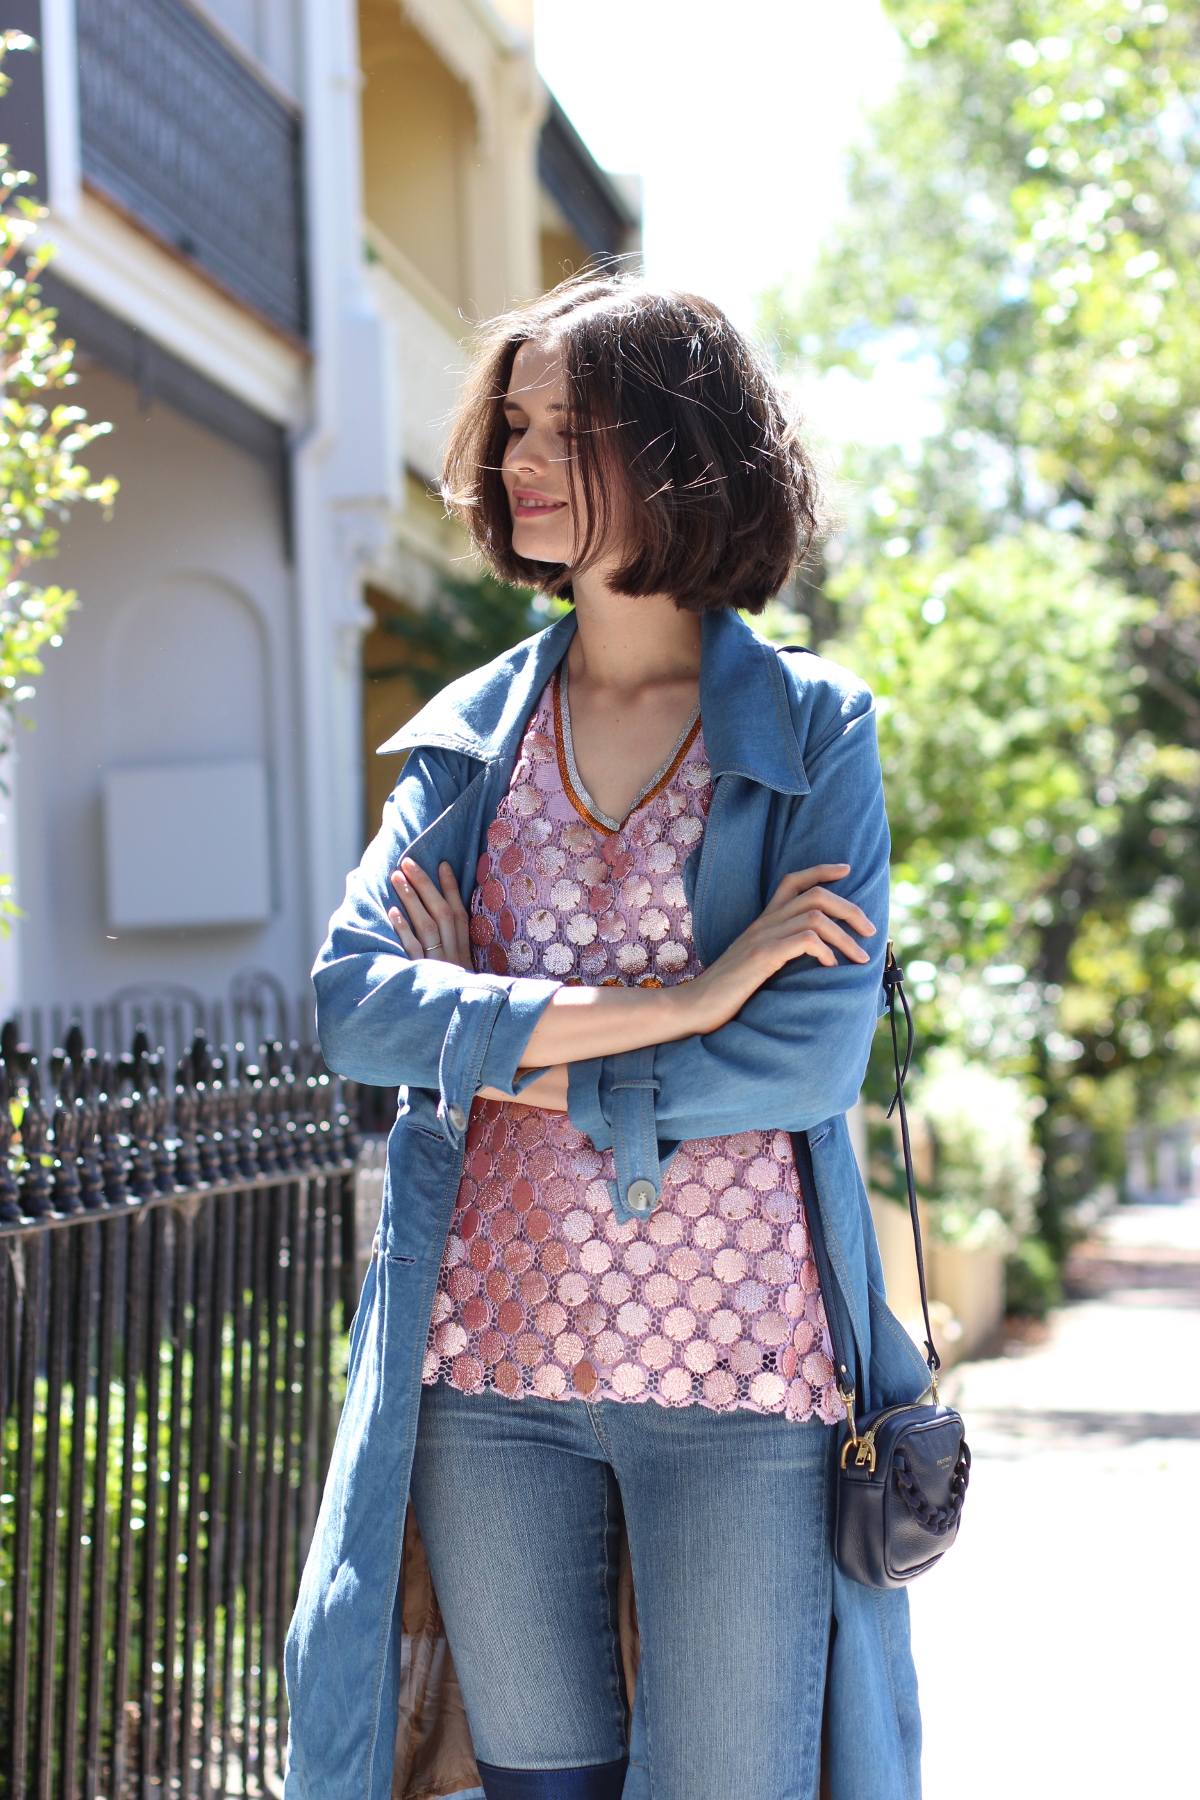 BY CHILL Chloe Hill Wearing Easton Pearson Pink metallic top, Dress up chambray trench coat and paige denim jeans